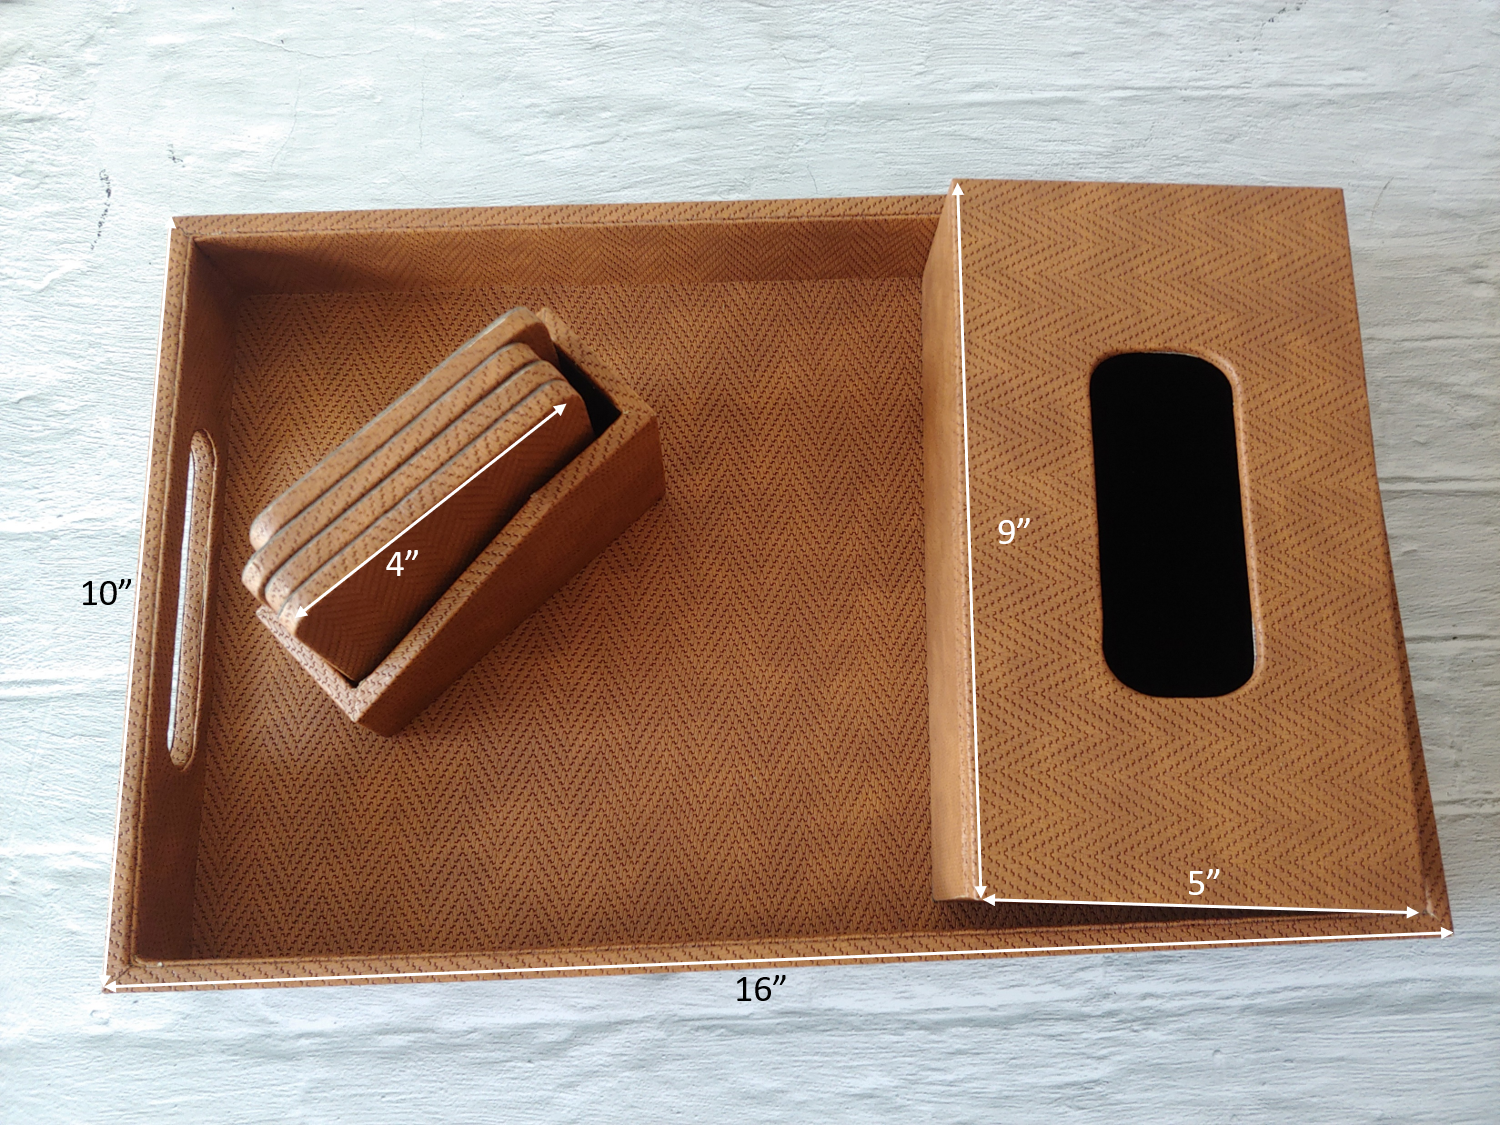 Fawn Zigzag Premium Leather Serving Tray along with tissue holder and coasters